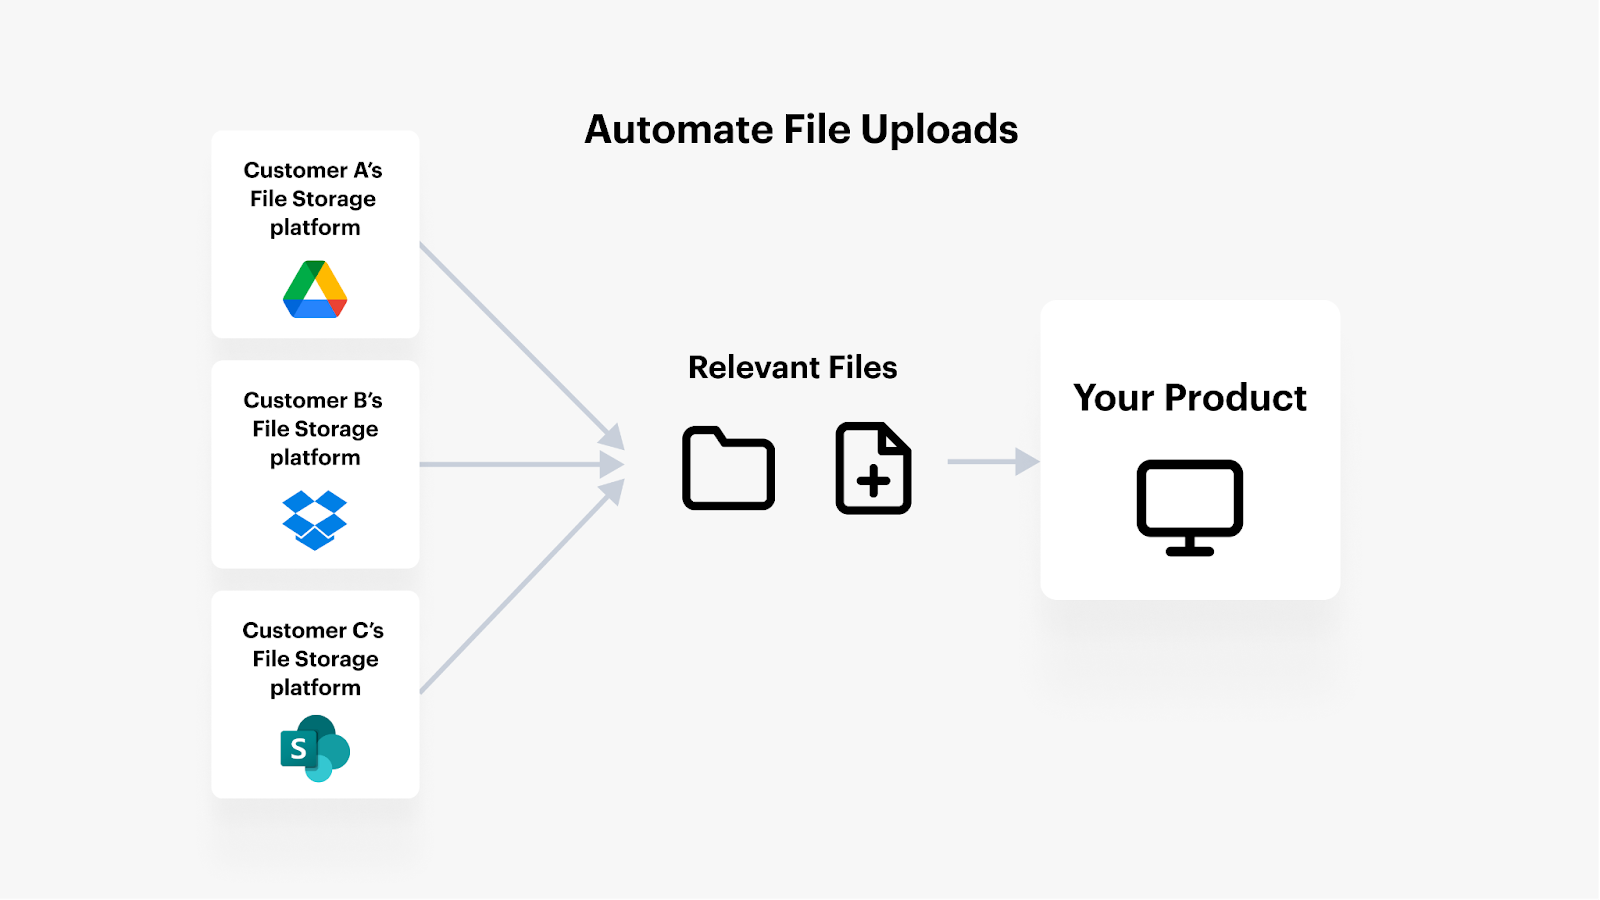 A visual breakdown of automating file uploads in your product